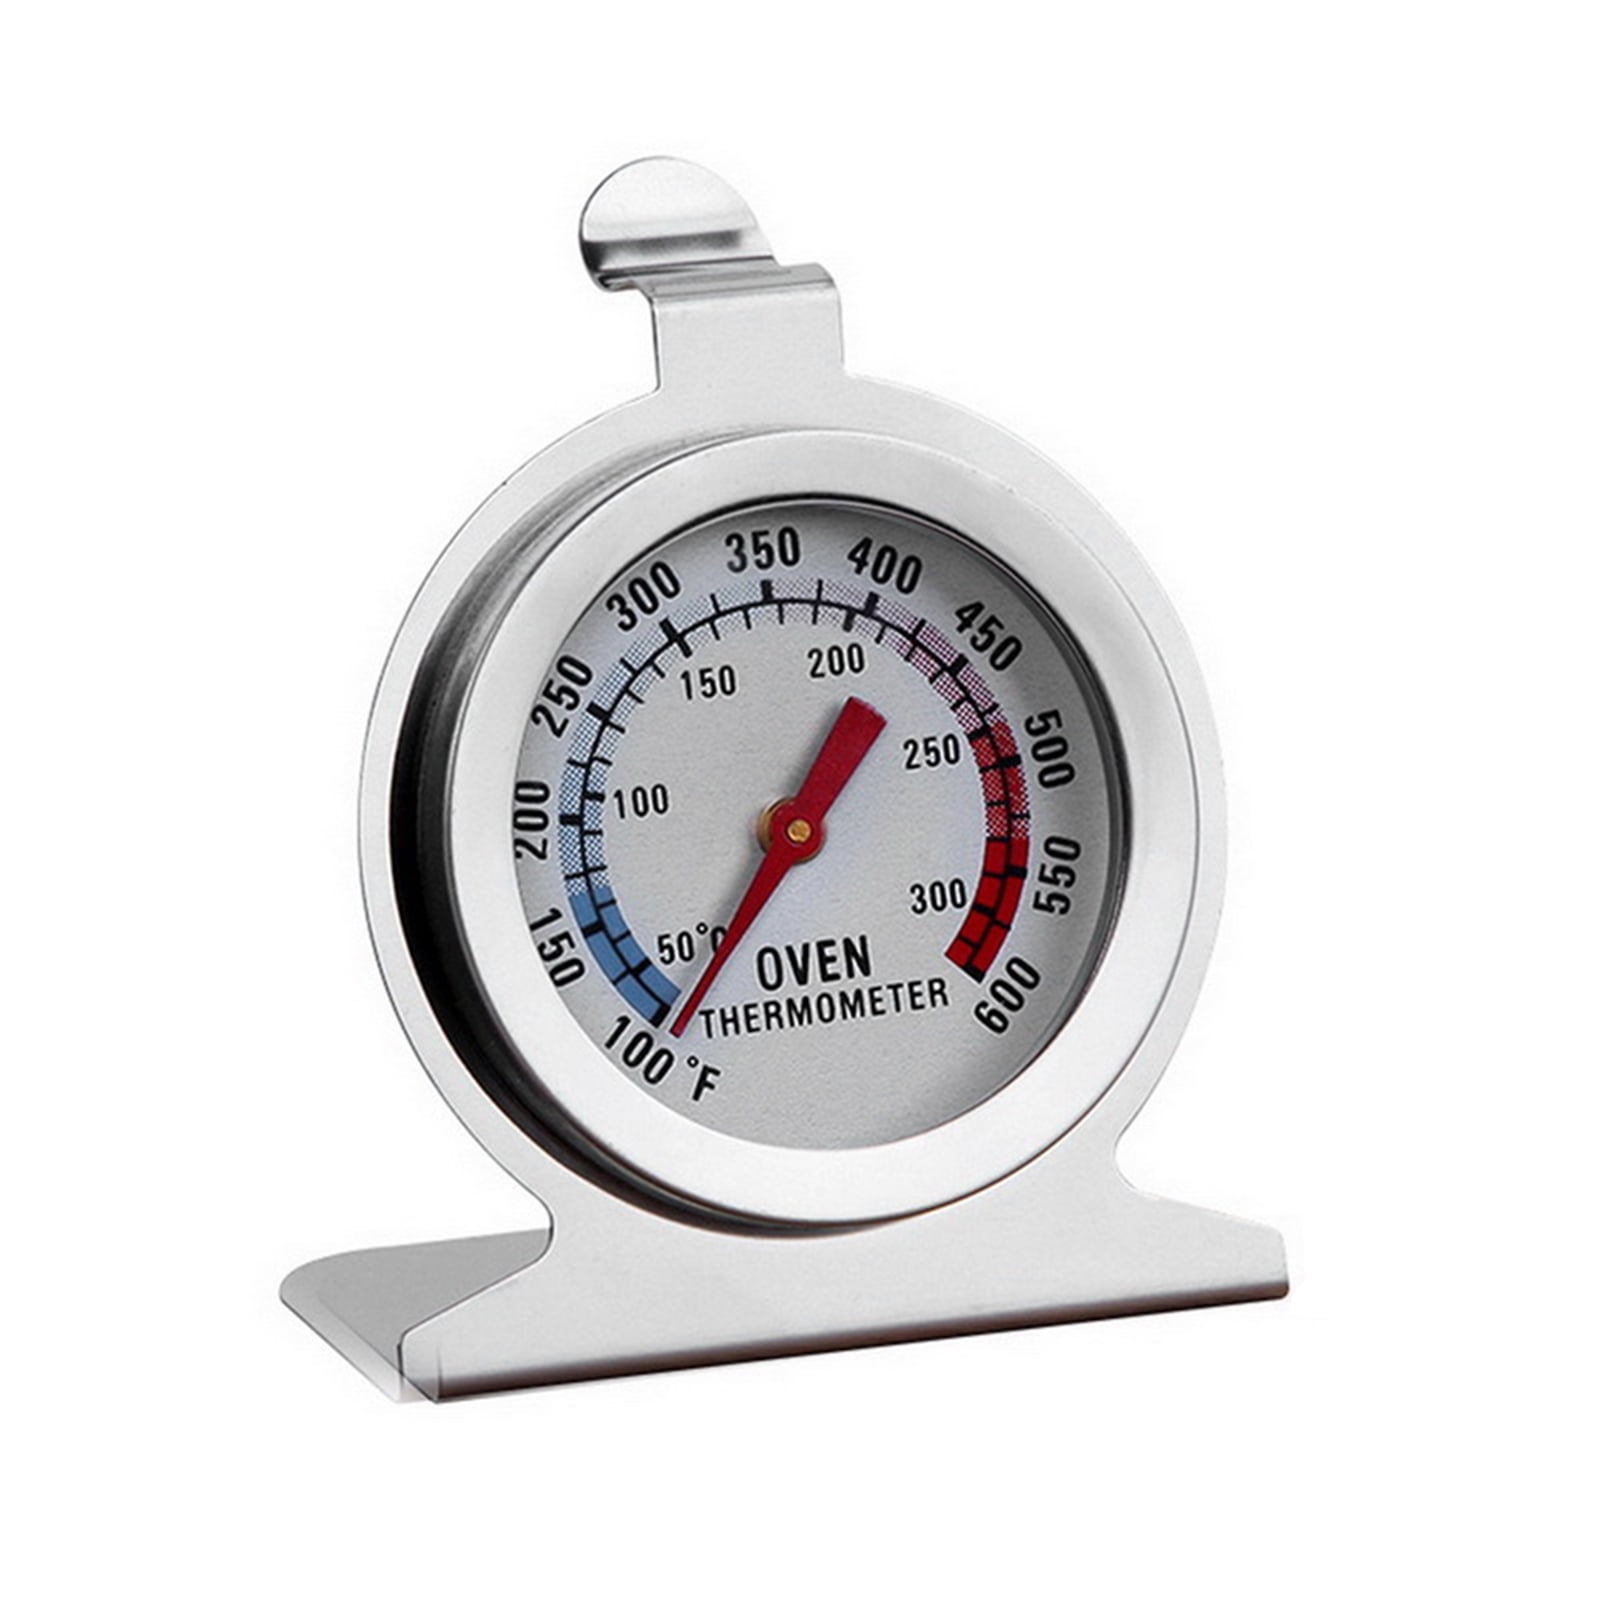 Supco ST04 Oven Thermometer Round Dial 100'F to 600'F Hanging/Standing Up 